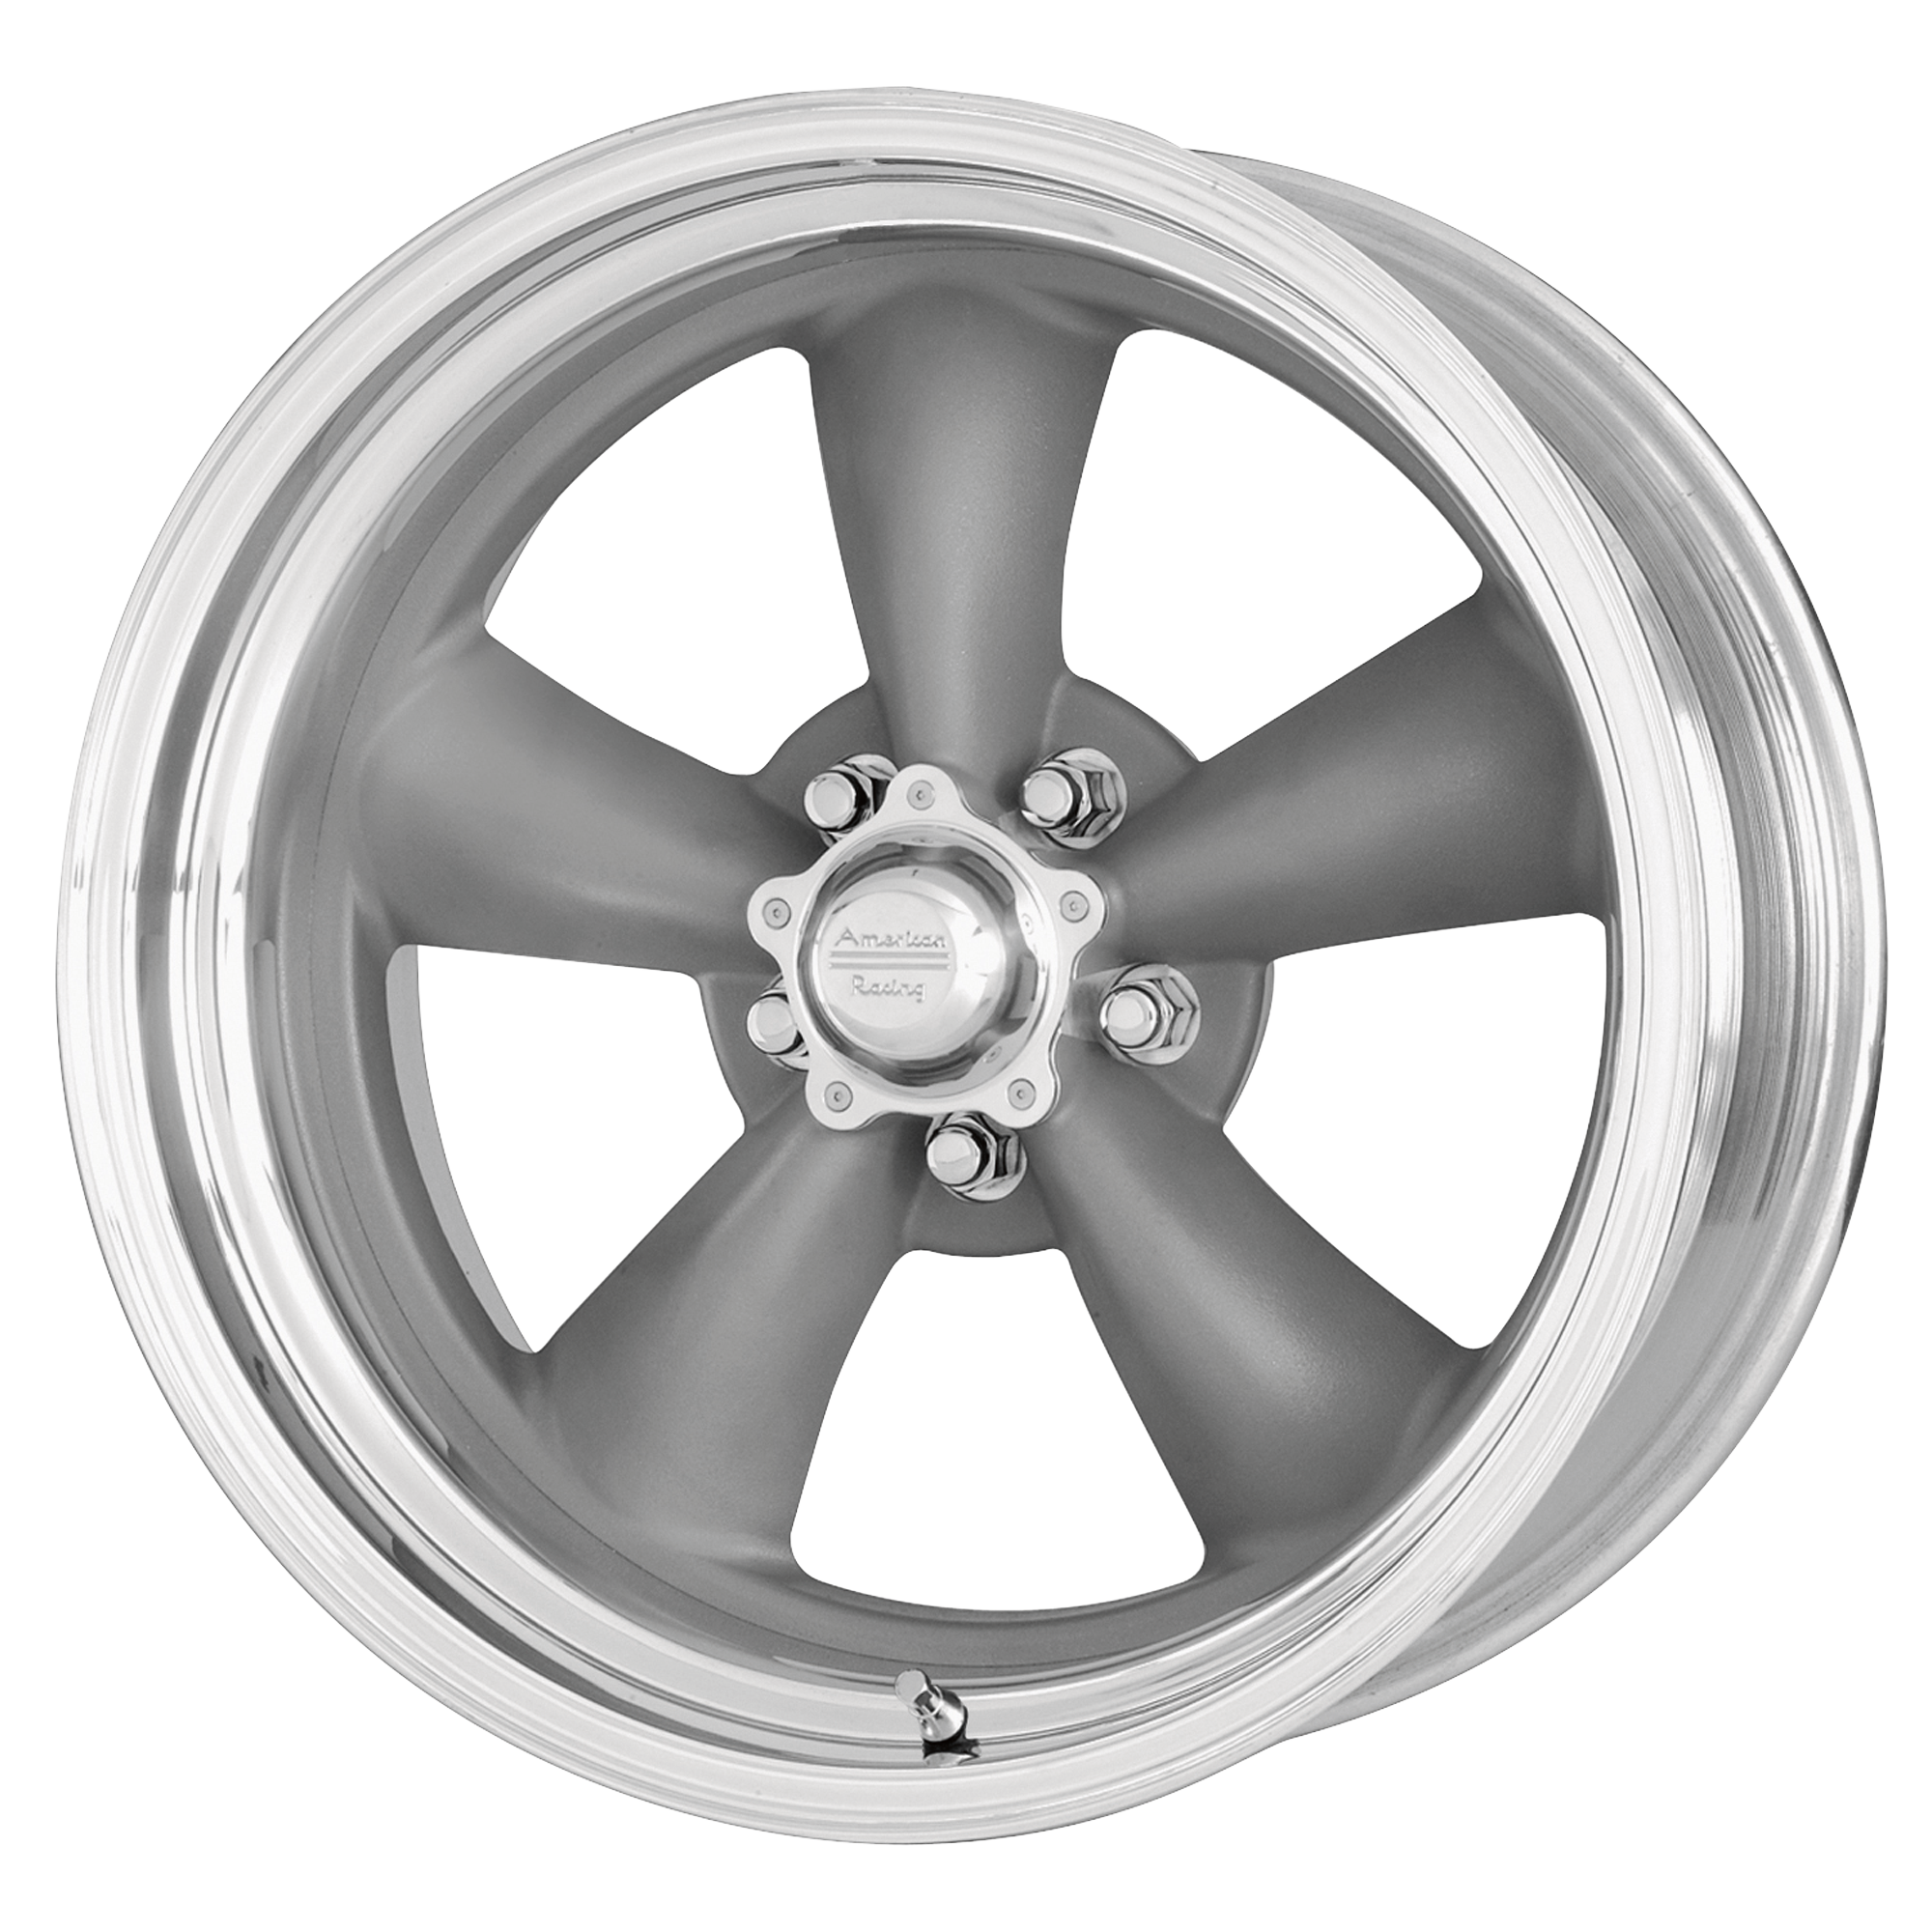 CLASSIC TORQ THRUST II ONE PIECE 18x10 5x120.65 MAG GRAY W/ MACHINED LIP (6 mm) - Tires and Engine Performance